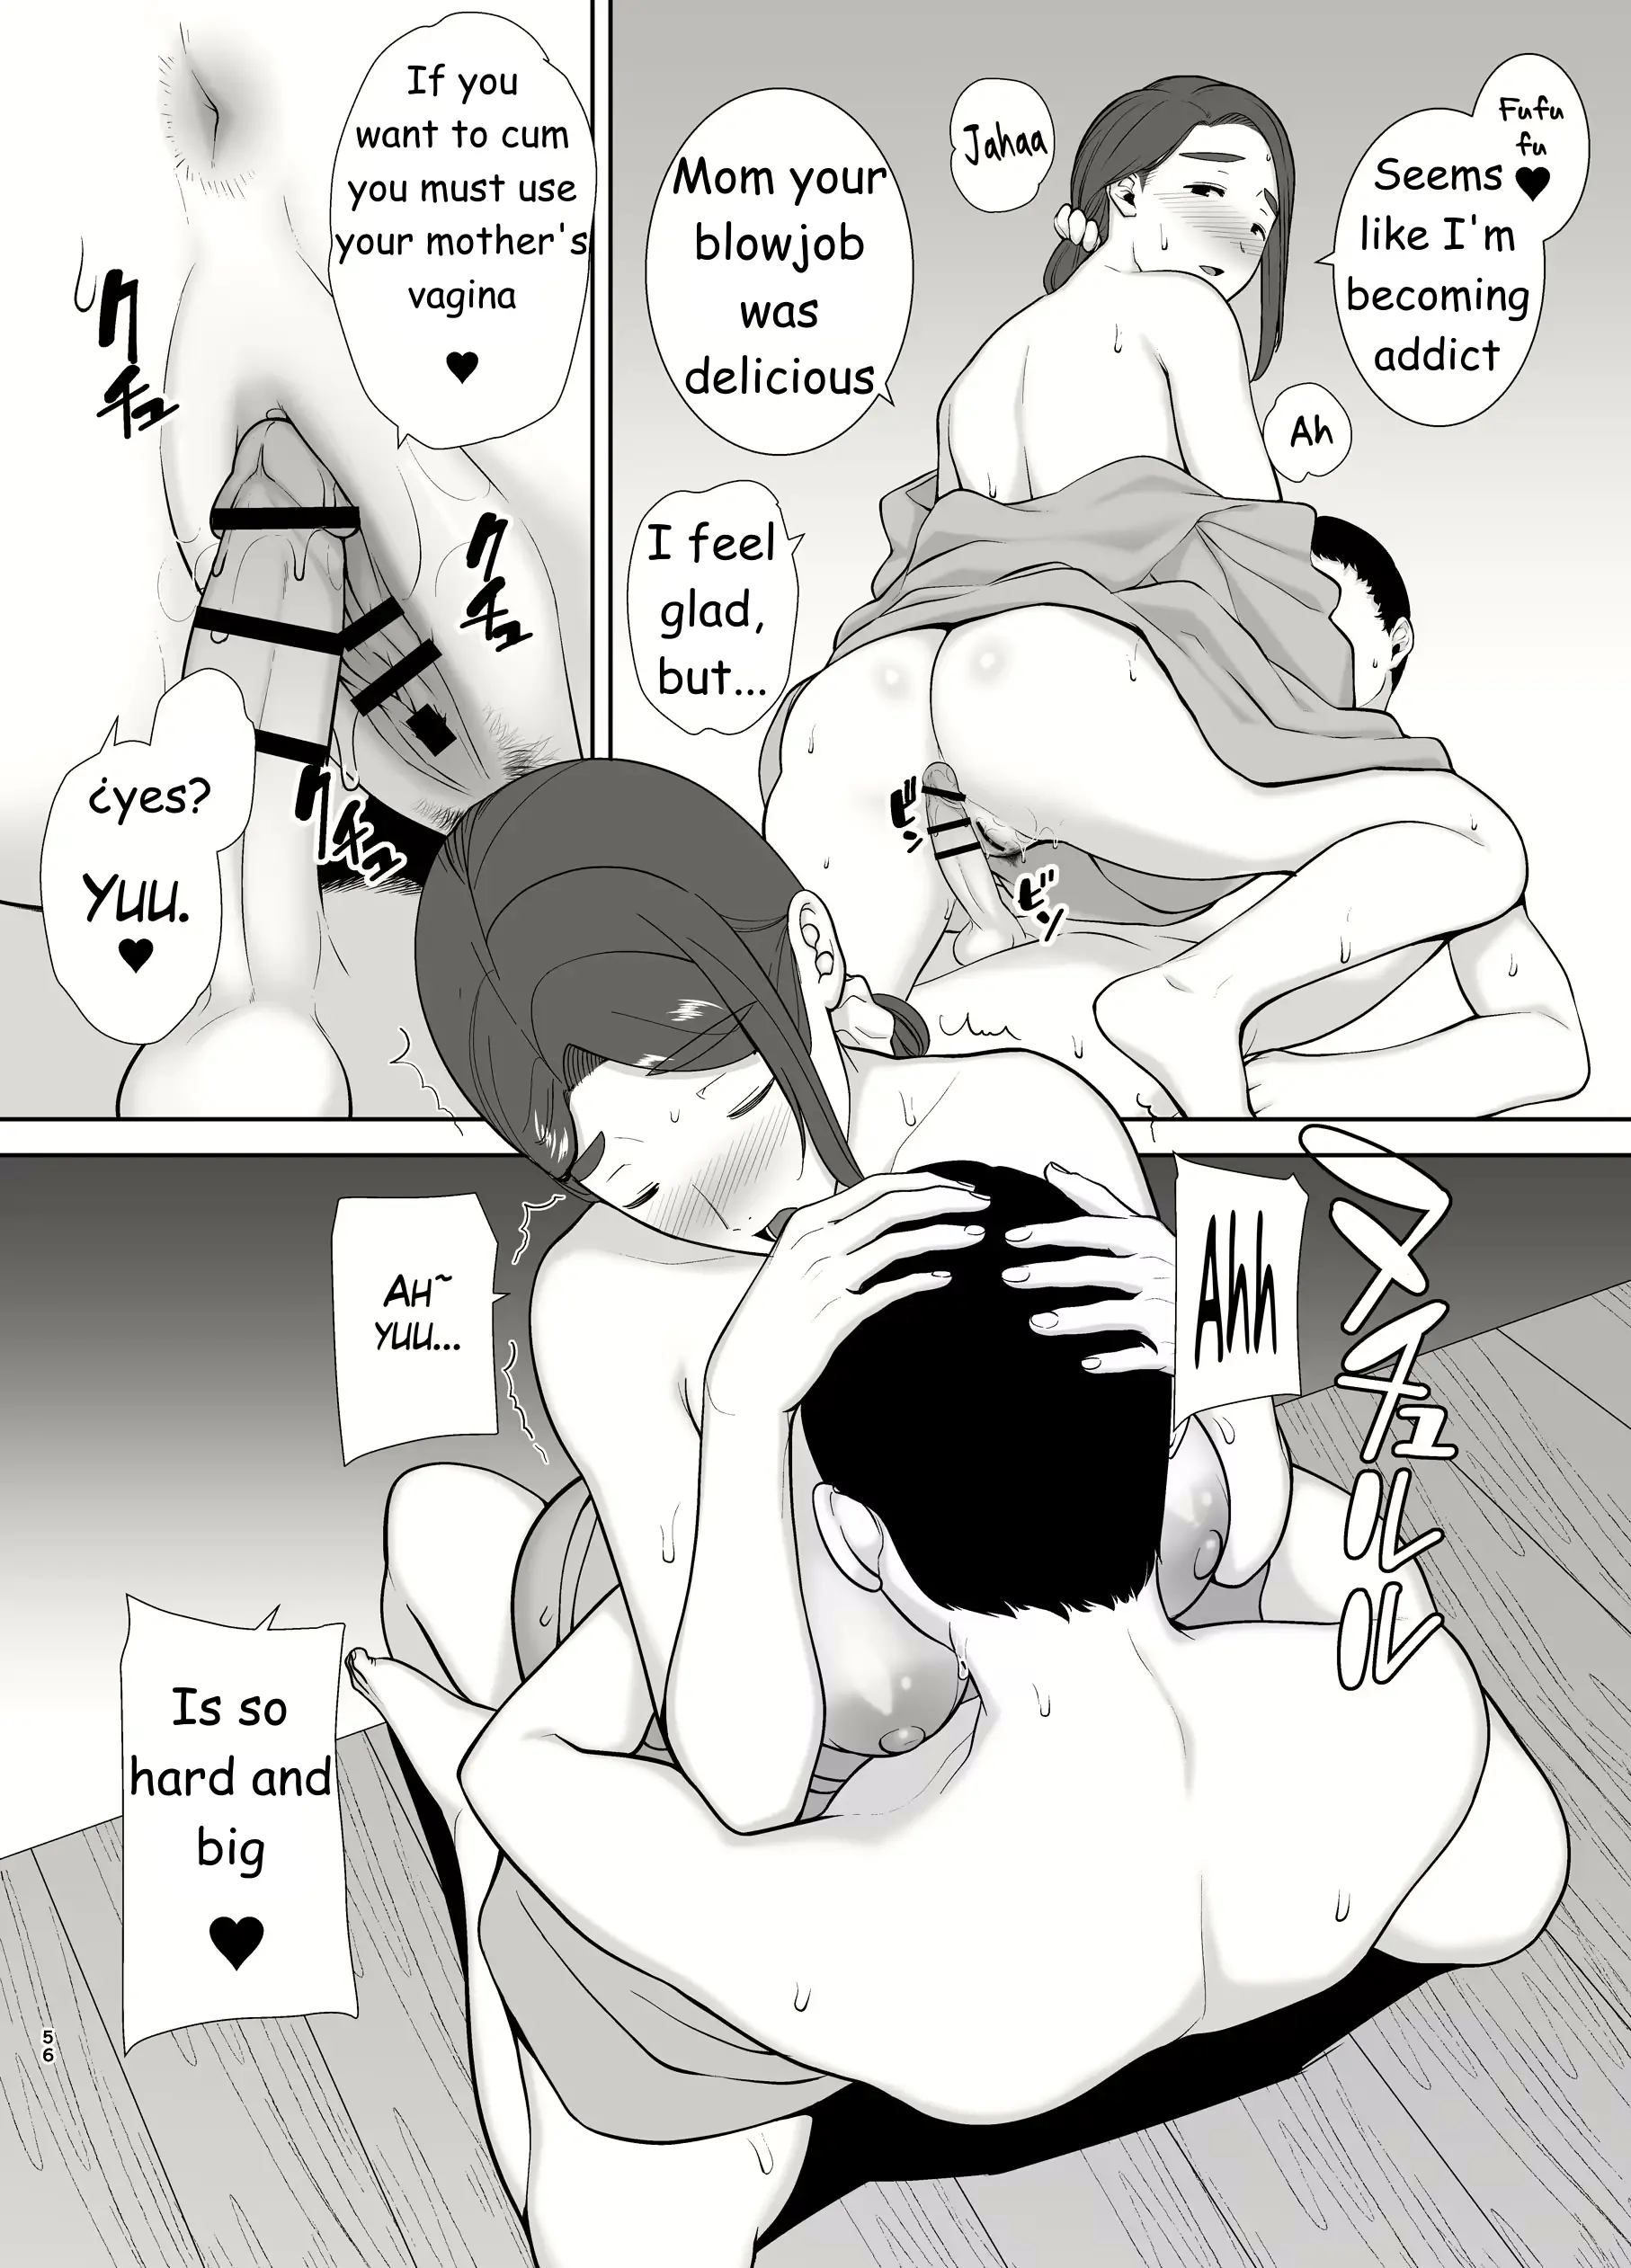 Incest hentai comics - Loving mother does everything for her perverted son 5